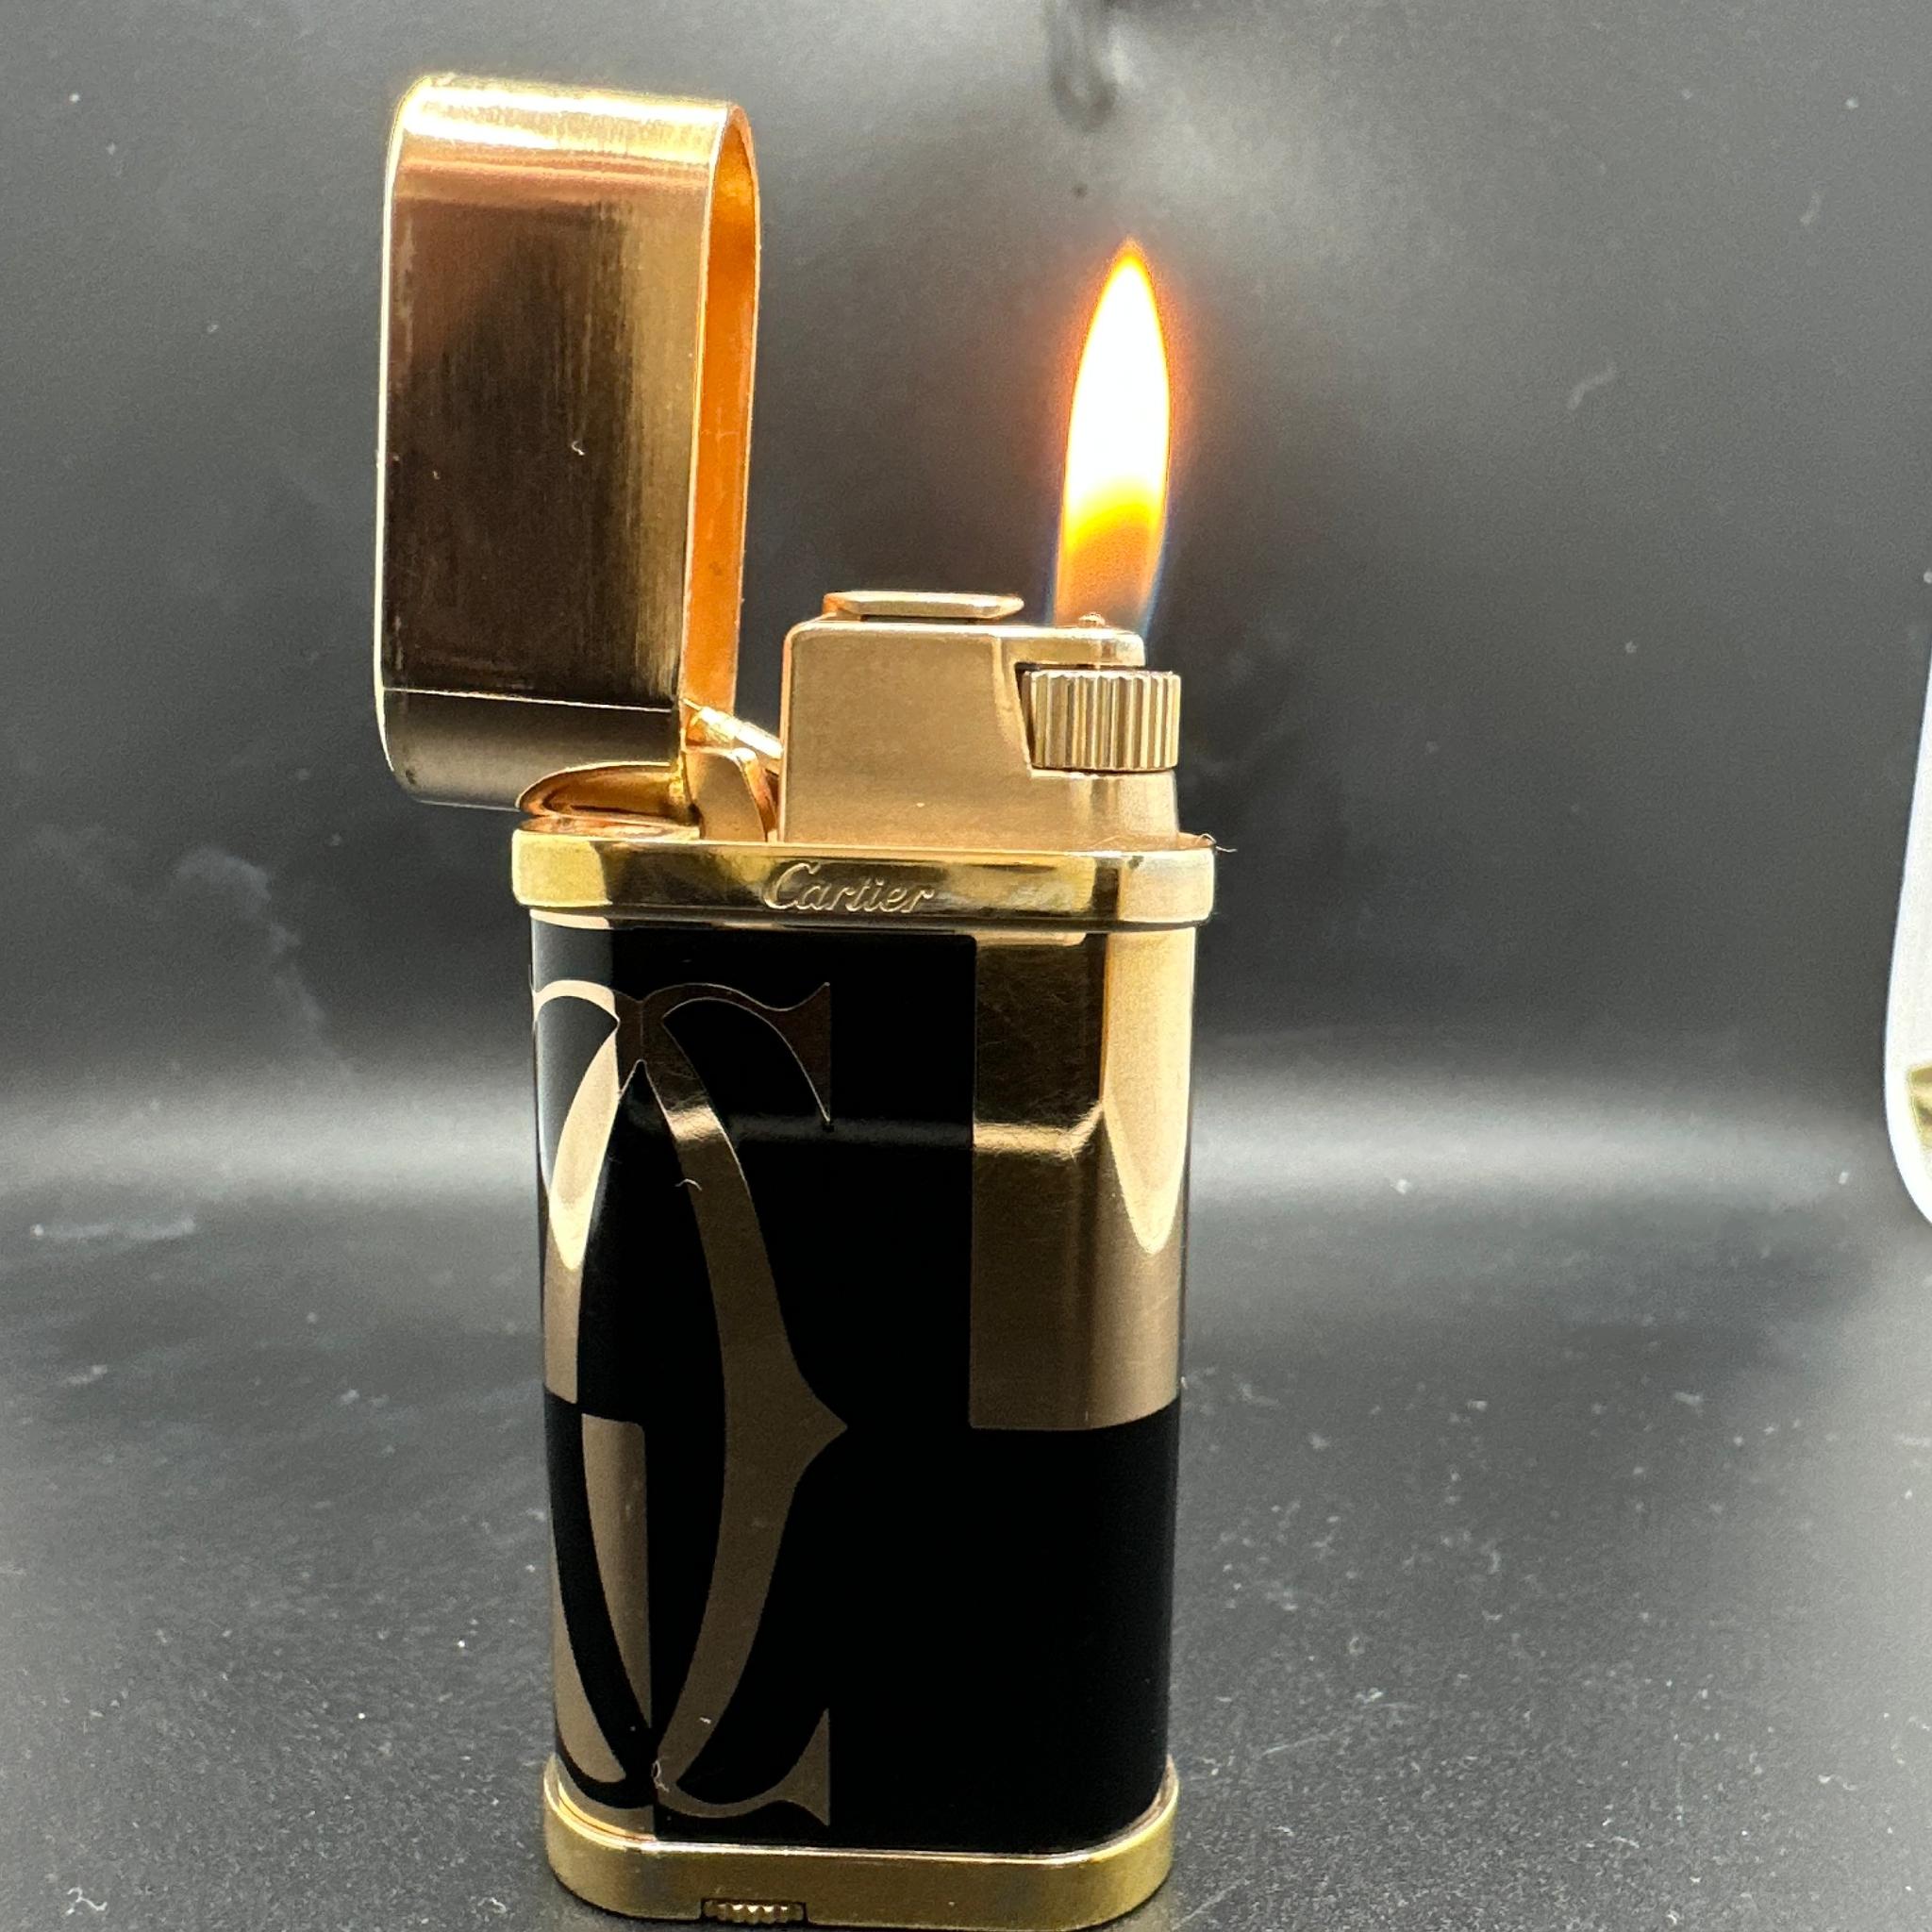 Cartier Oval lighter with logotype decor - Yellow Gold plated and Black Lacquer.
This is an out of stock yellow gold and black Cartier.
One owner, rare lighter, in great working condition. 
Beautiful.
Come with the original Cartier box and papers.